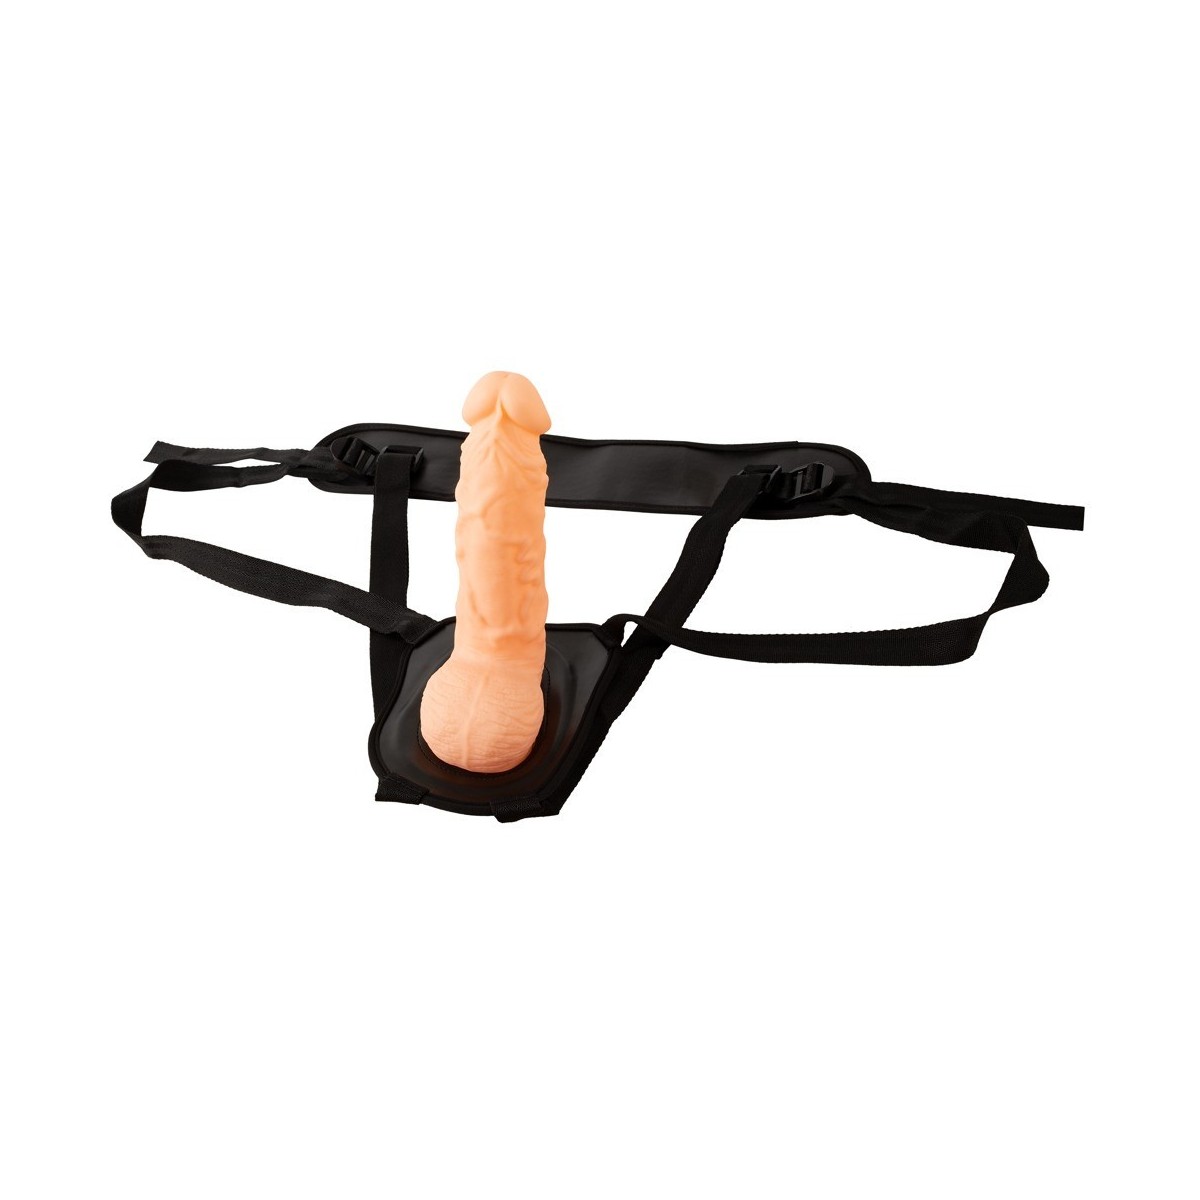 fallo indossible Erection Assistant Hollow Strap-On